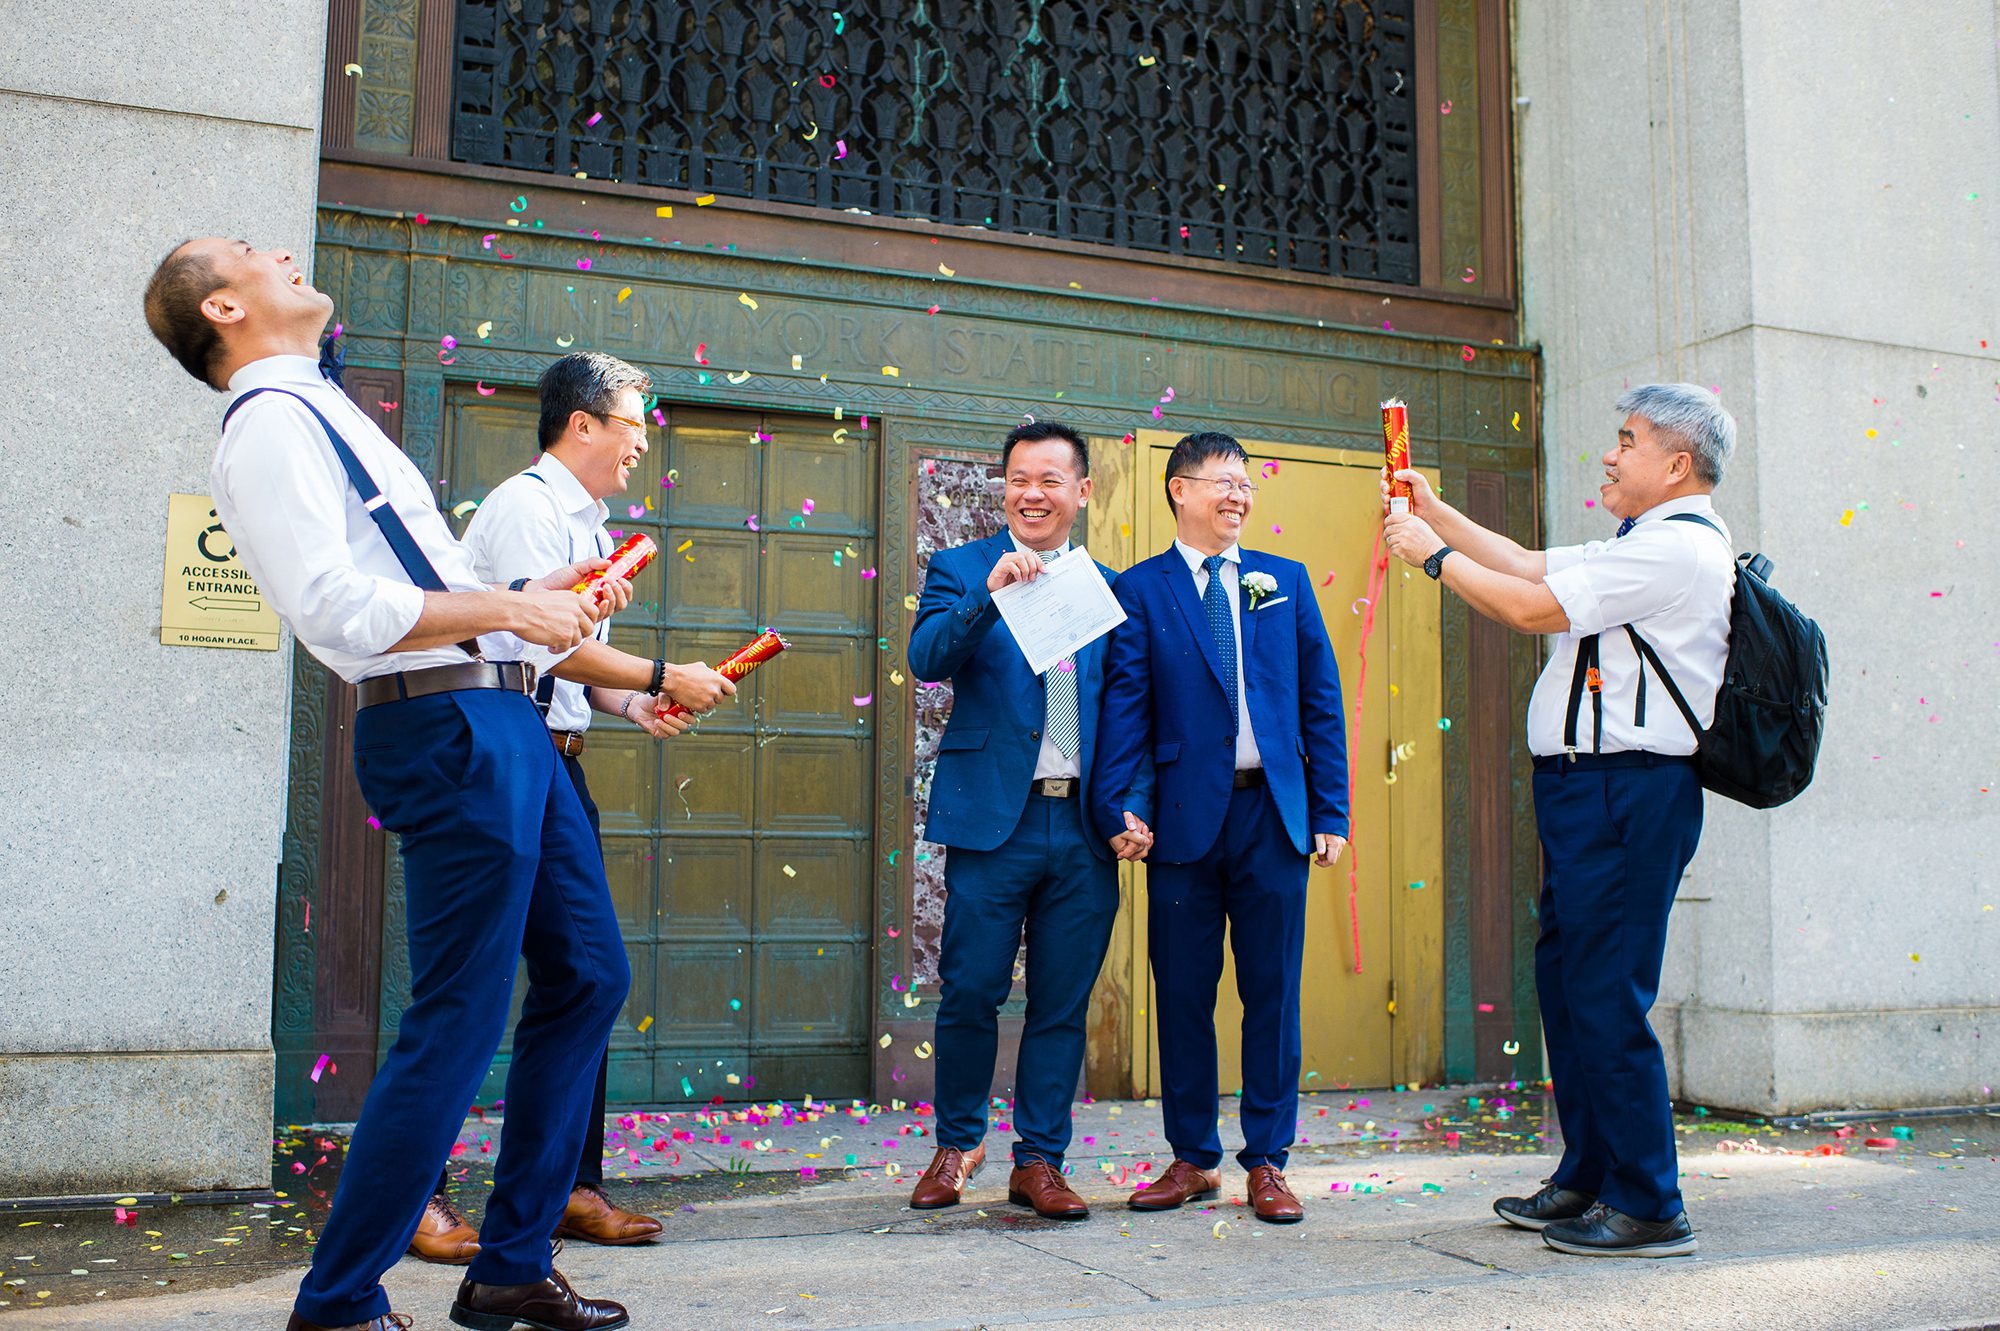 Two grooms exiting City Hall with confetti poppers. 